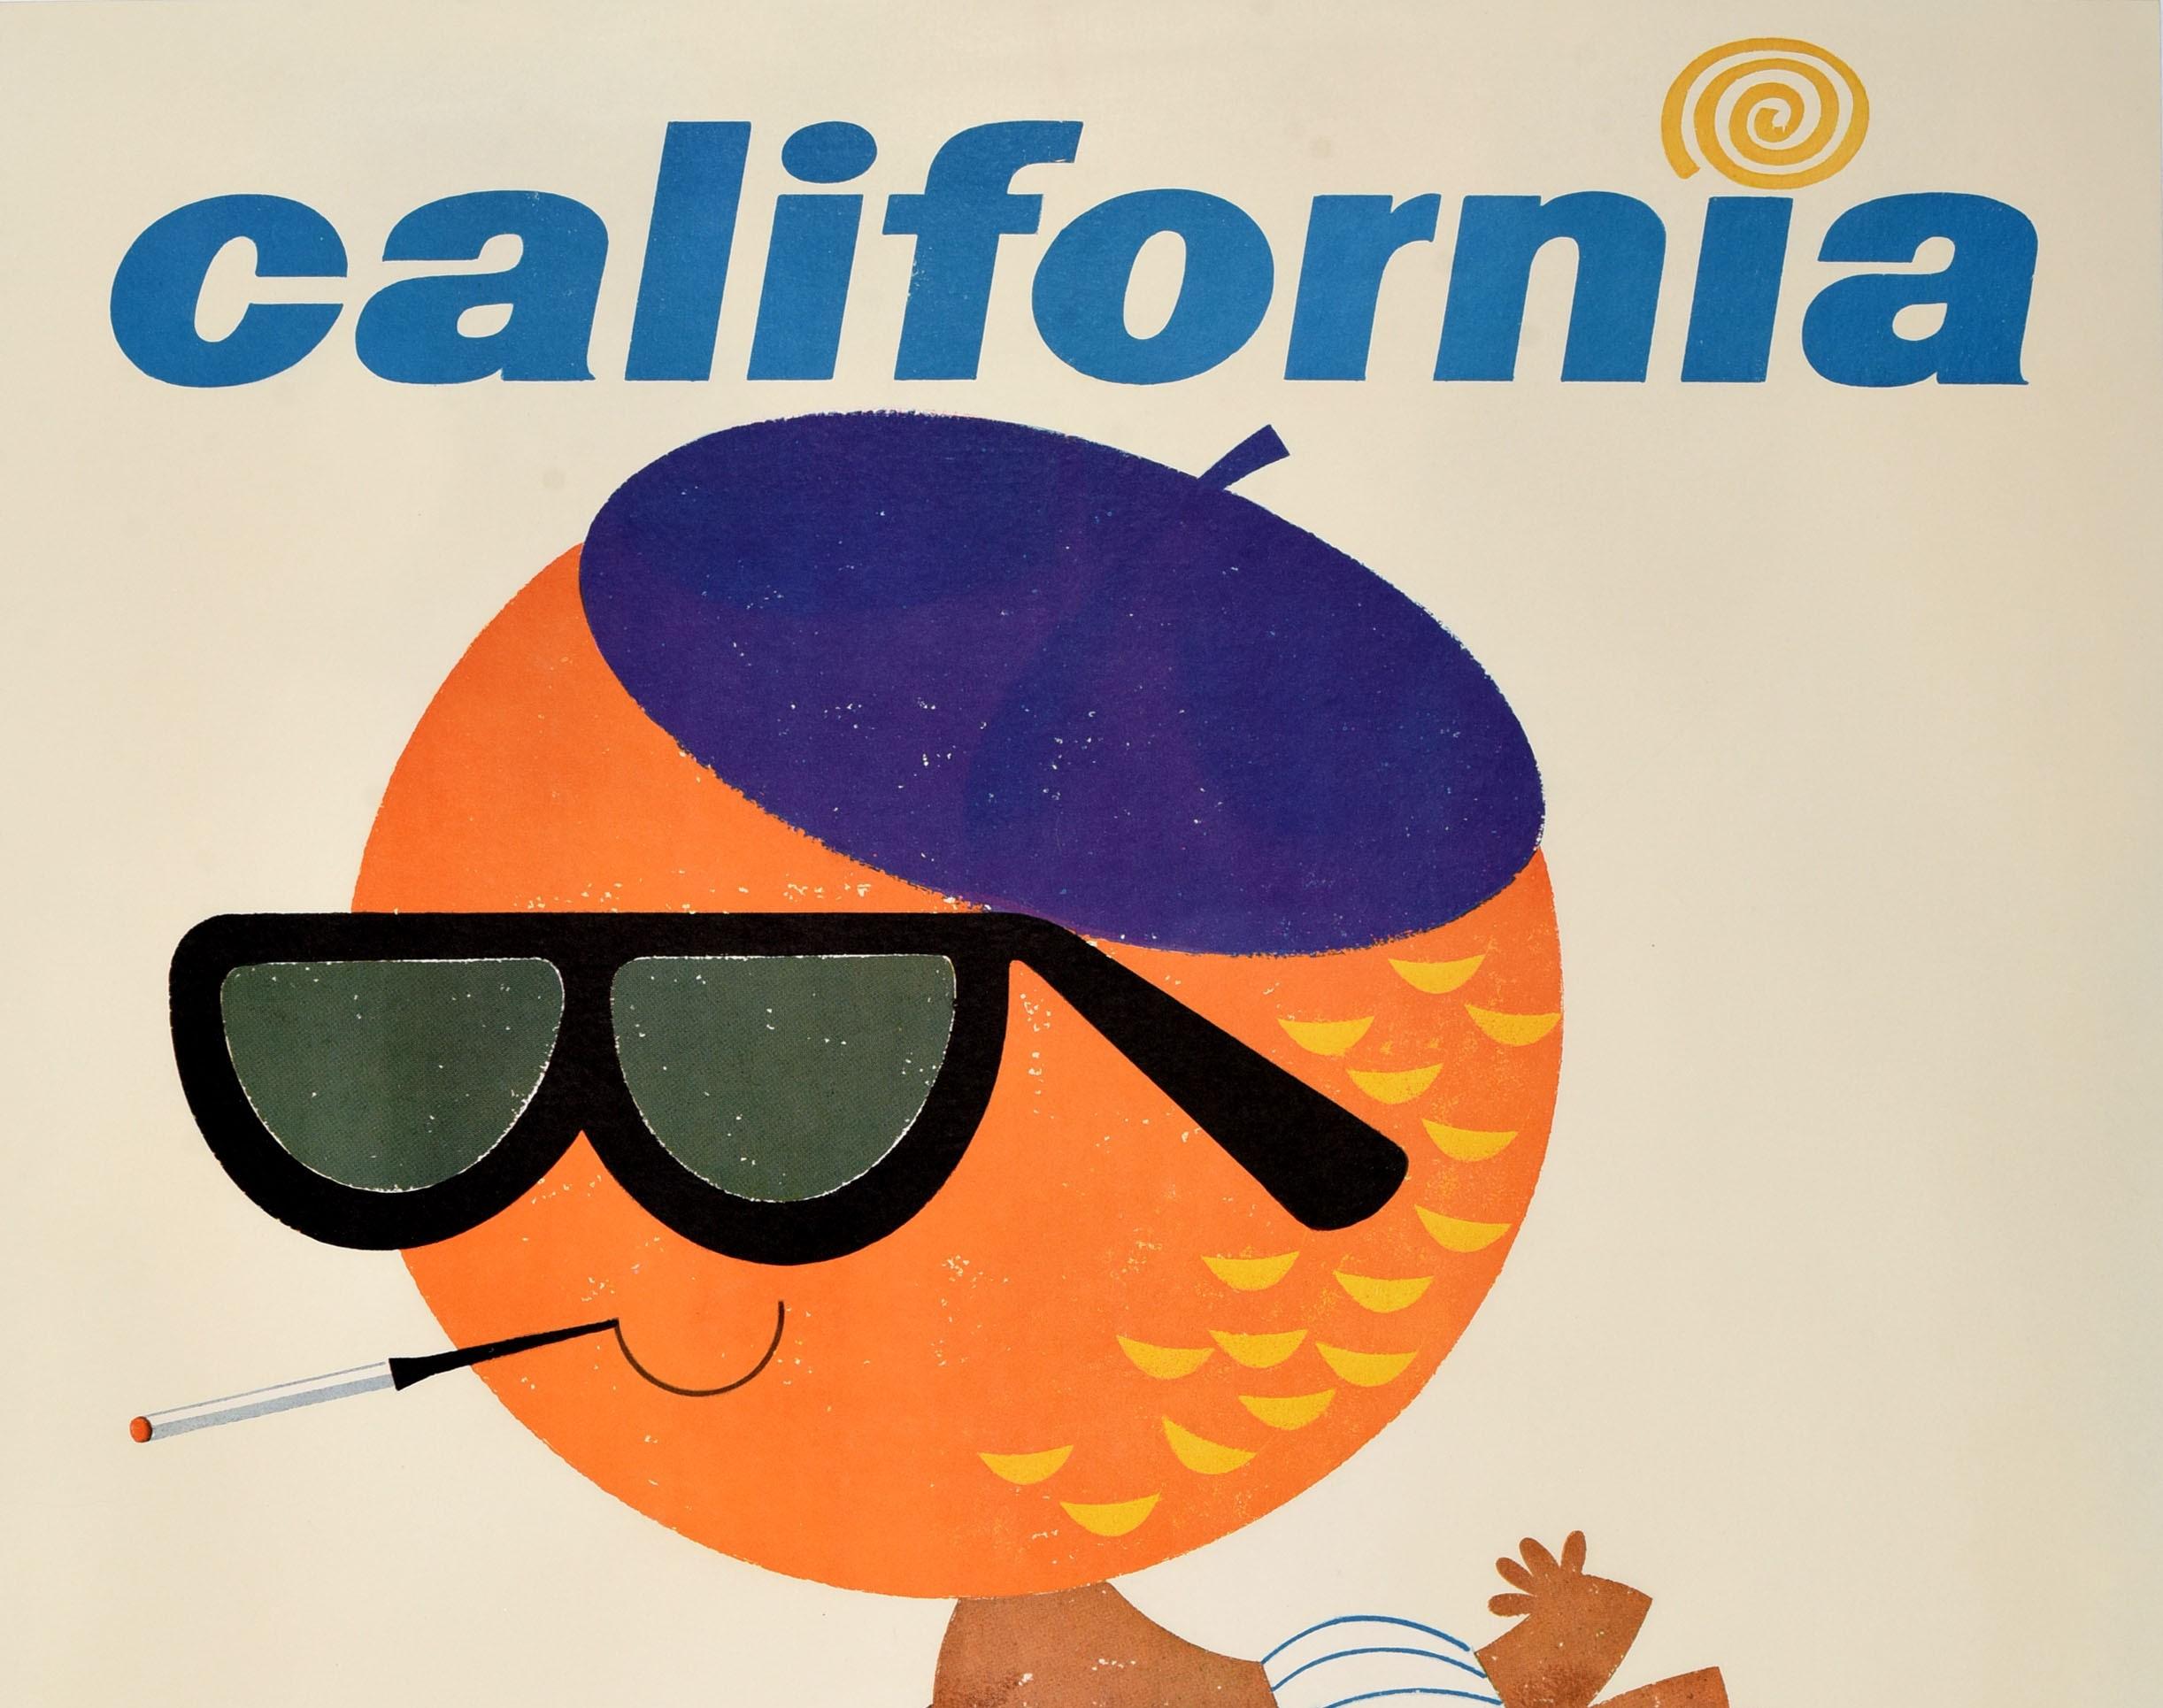 Original vintage travel poster - California Continental Airlines - featuring a fun design depicting a smiling orange sun headed character wearing a purple beret hat, sunglasses and striped shorts, smoking a cigarette with a cigarette holder while